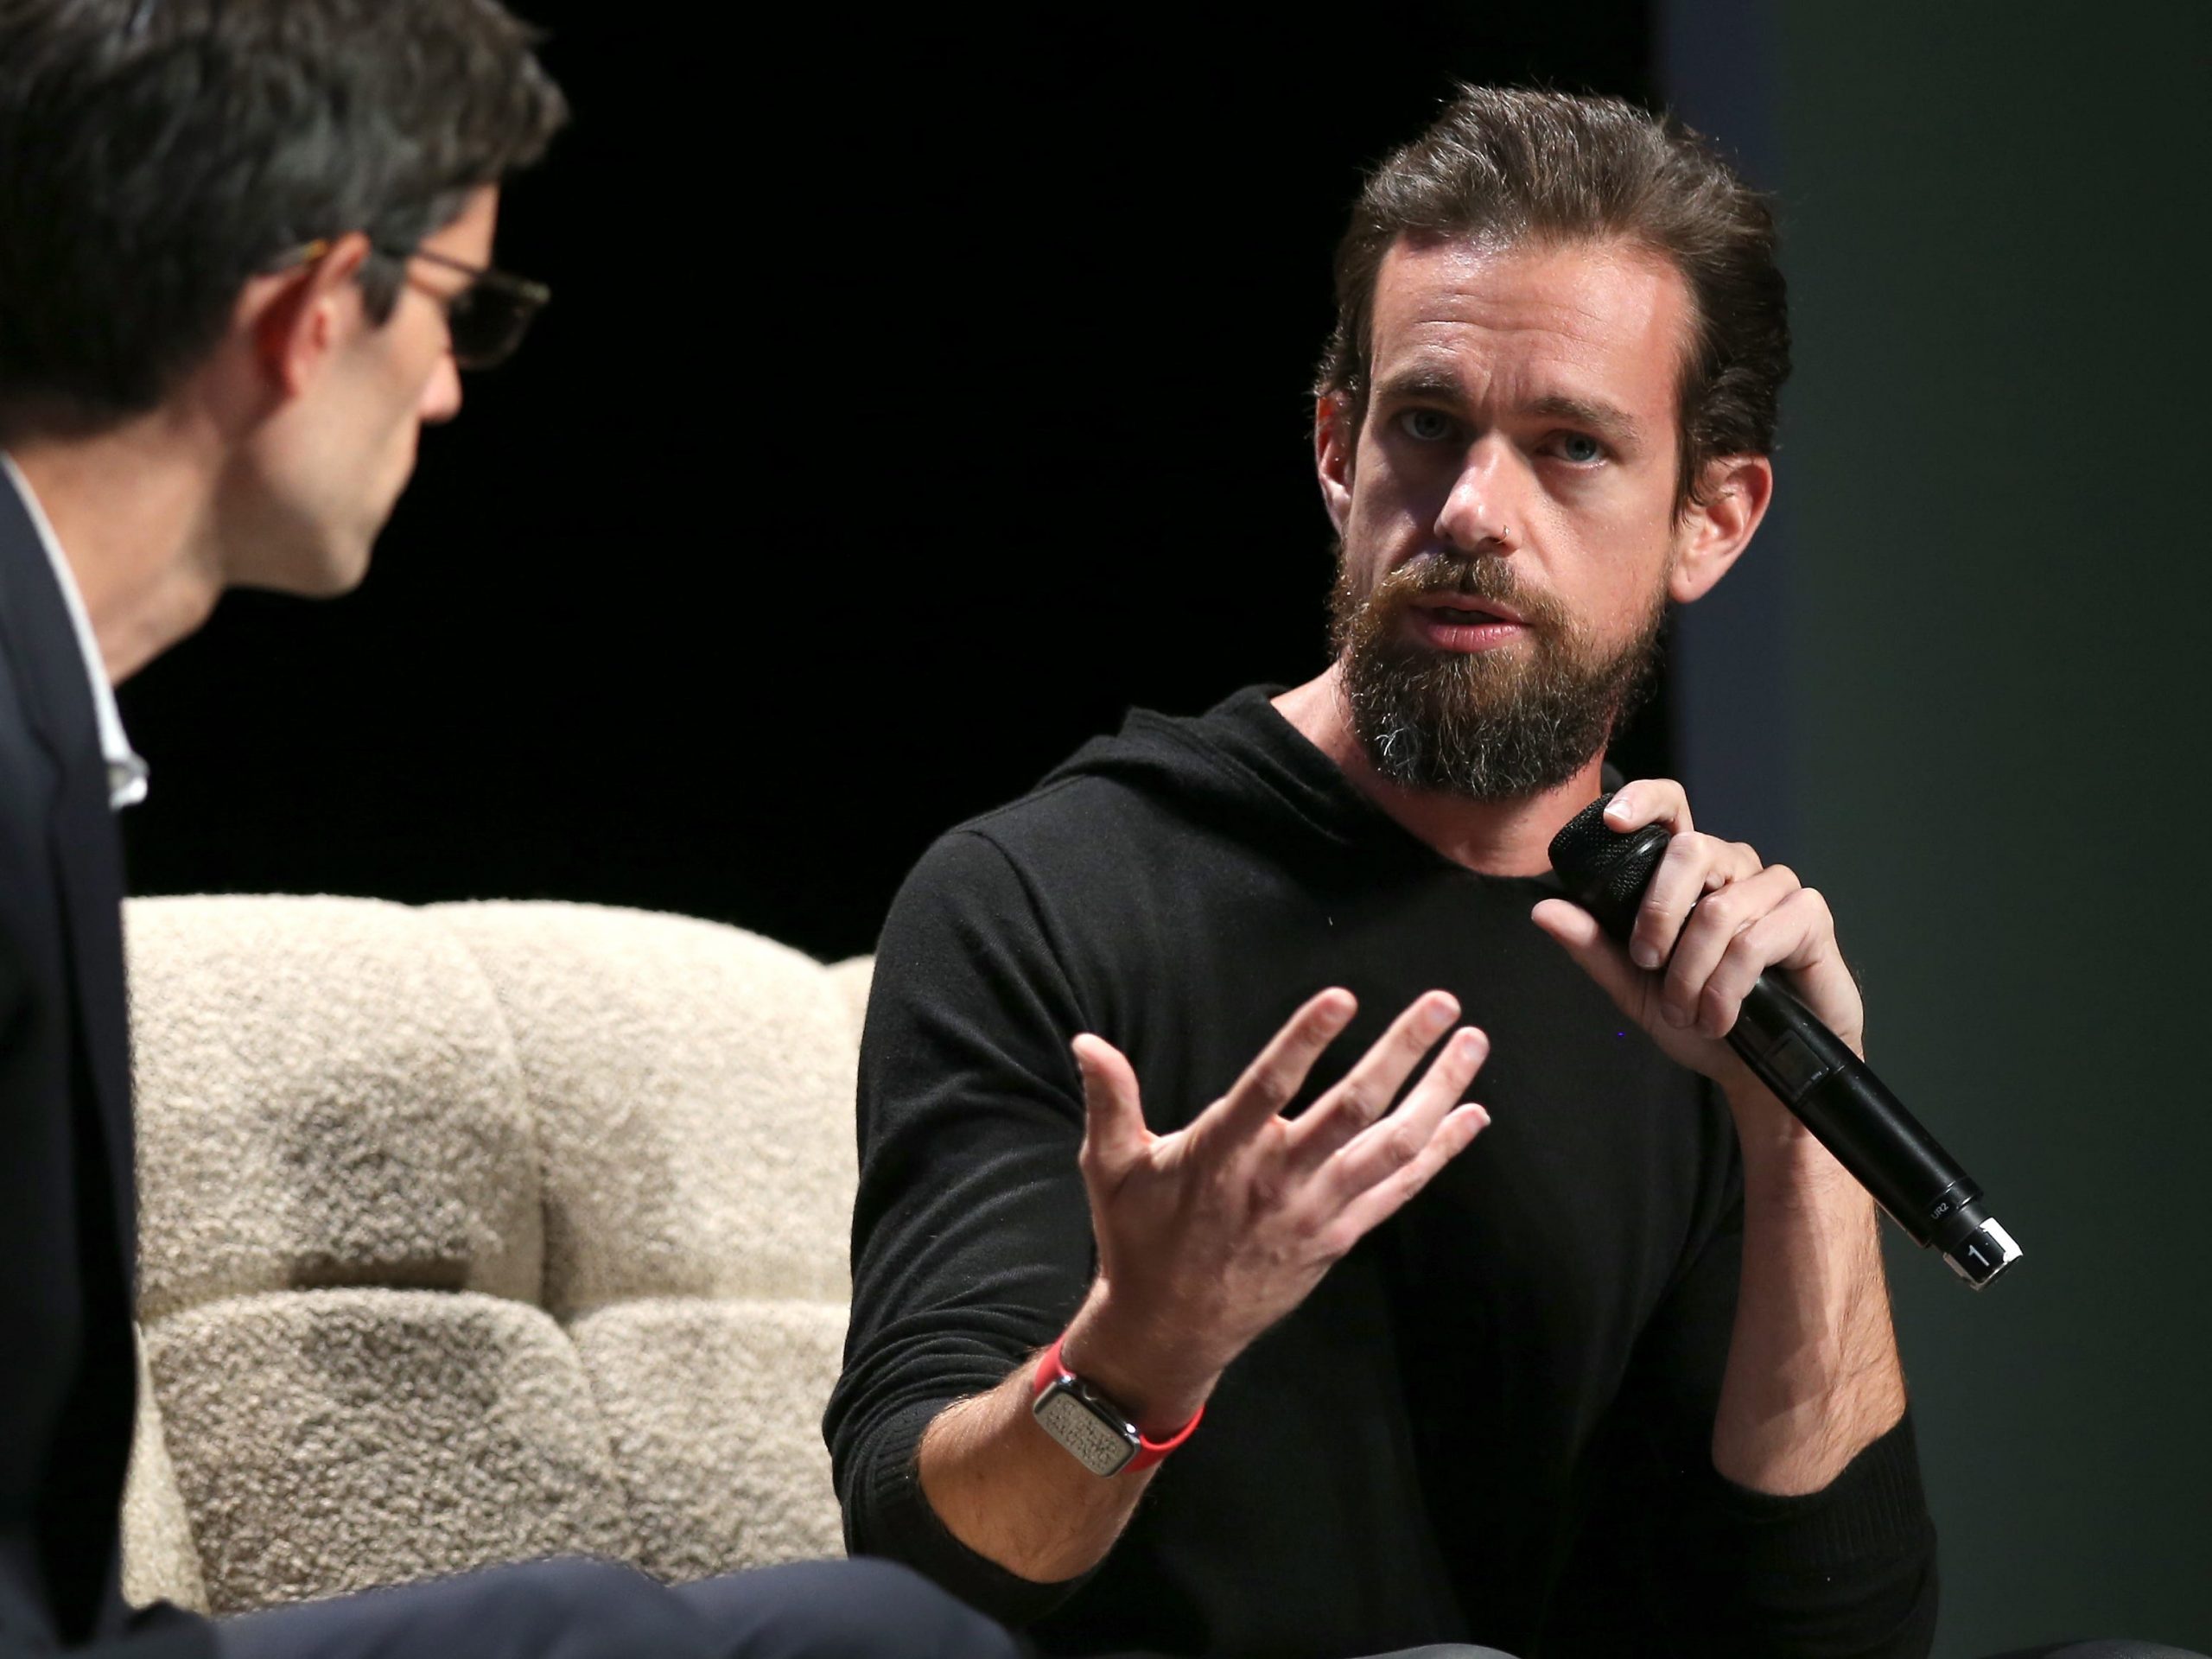 Jack Dorsey speaking to another man with a microphone.